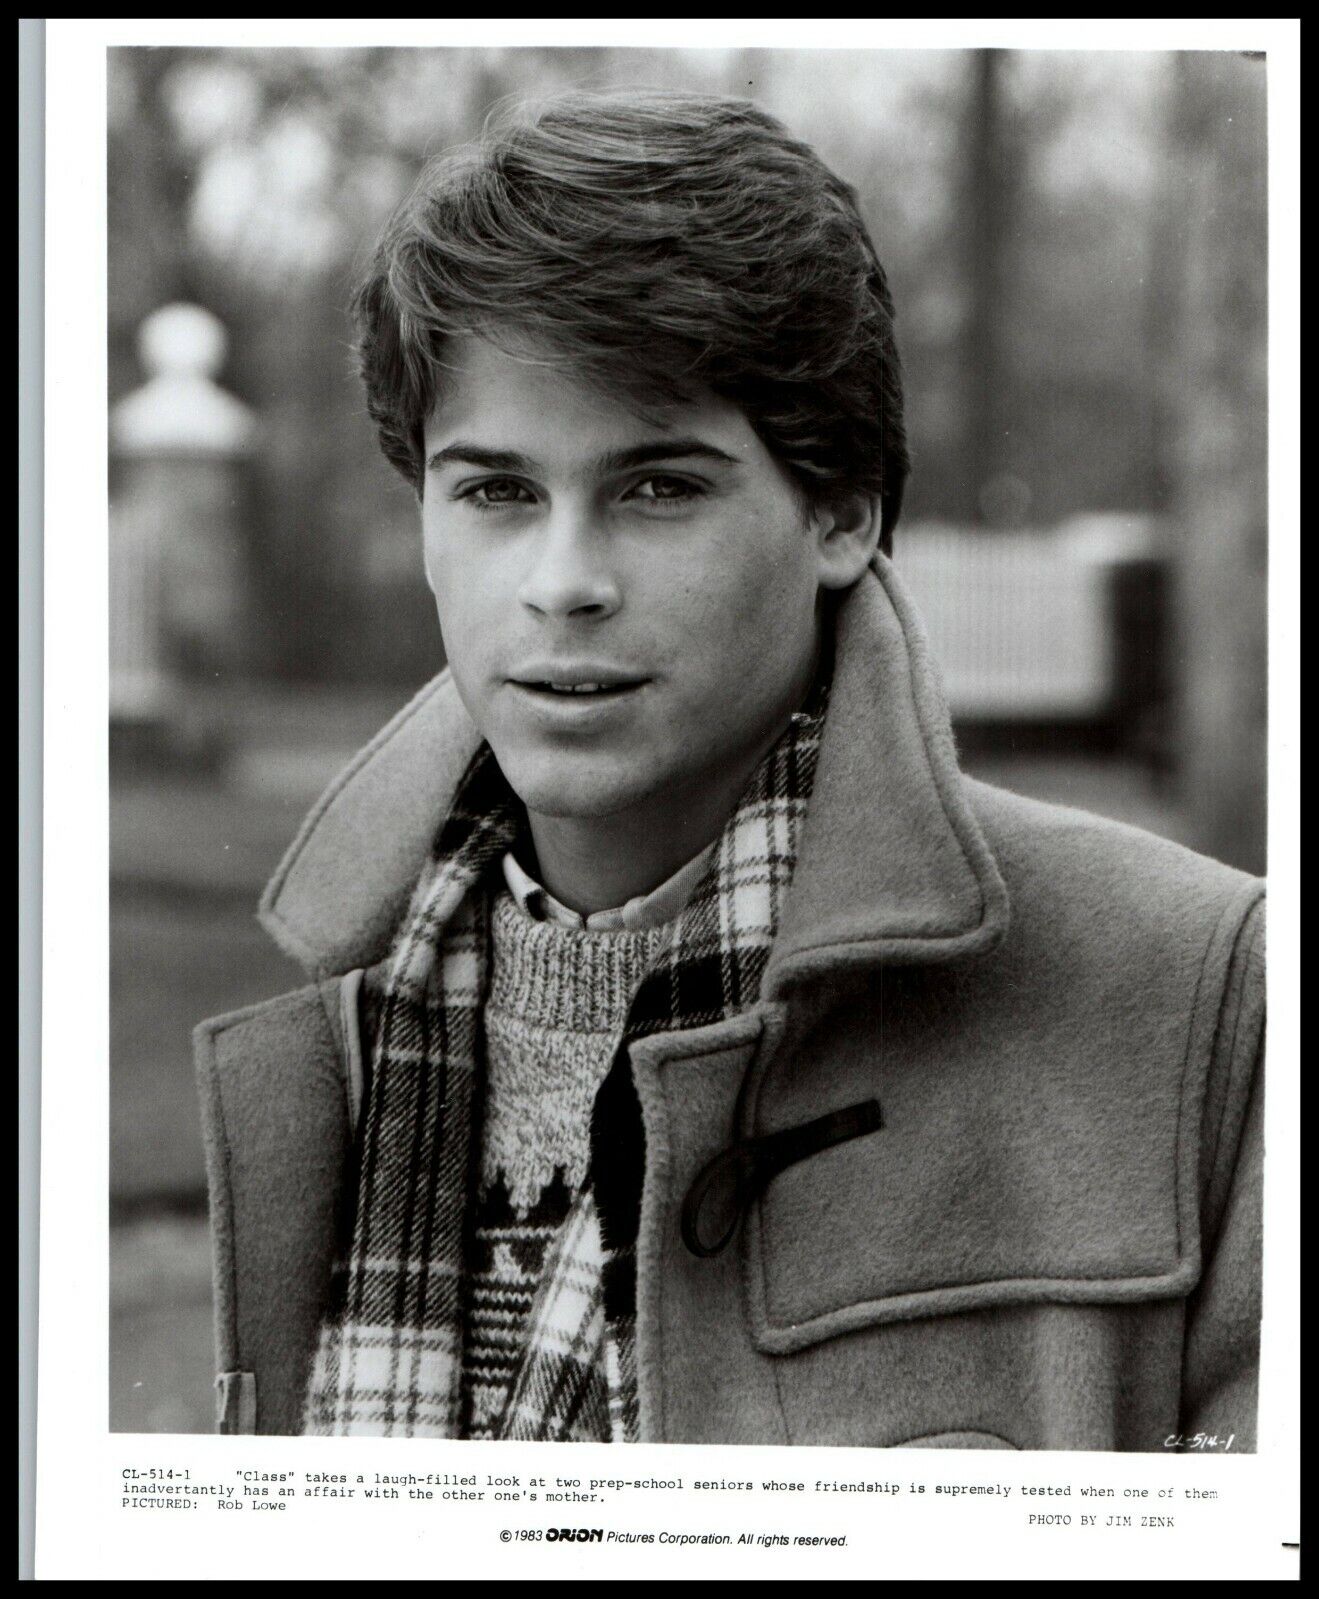 Rob Lowe in Class (1983) STUNNING HANDSOME ORIGINAL VINTAGE PHOTO M 63